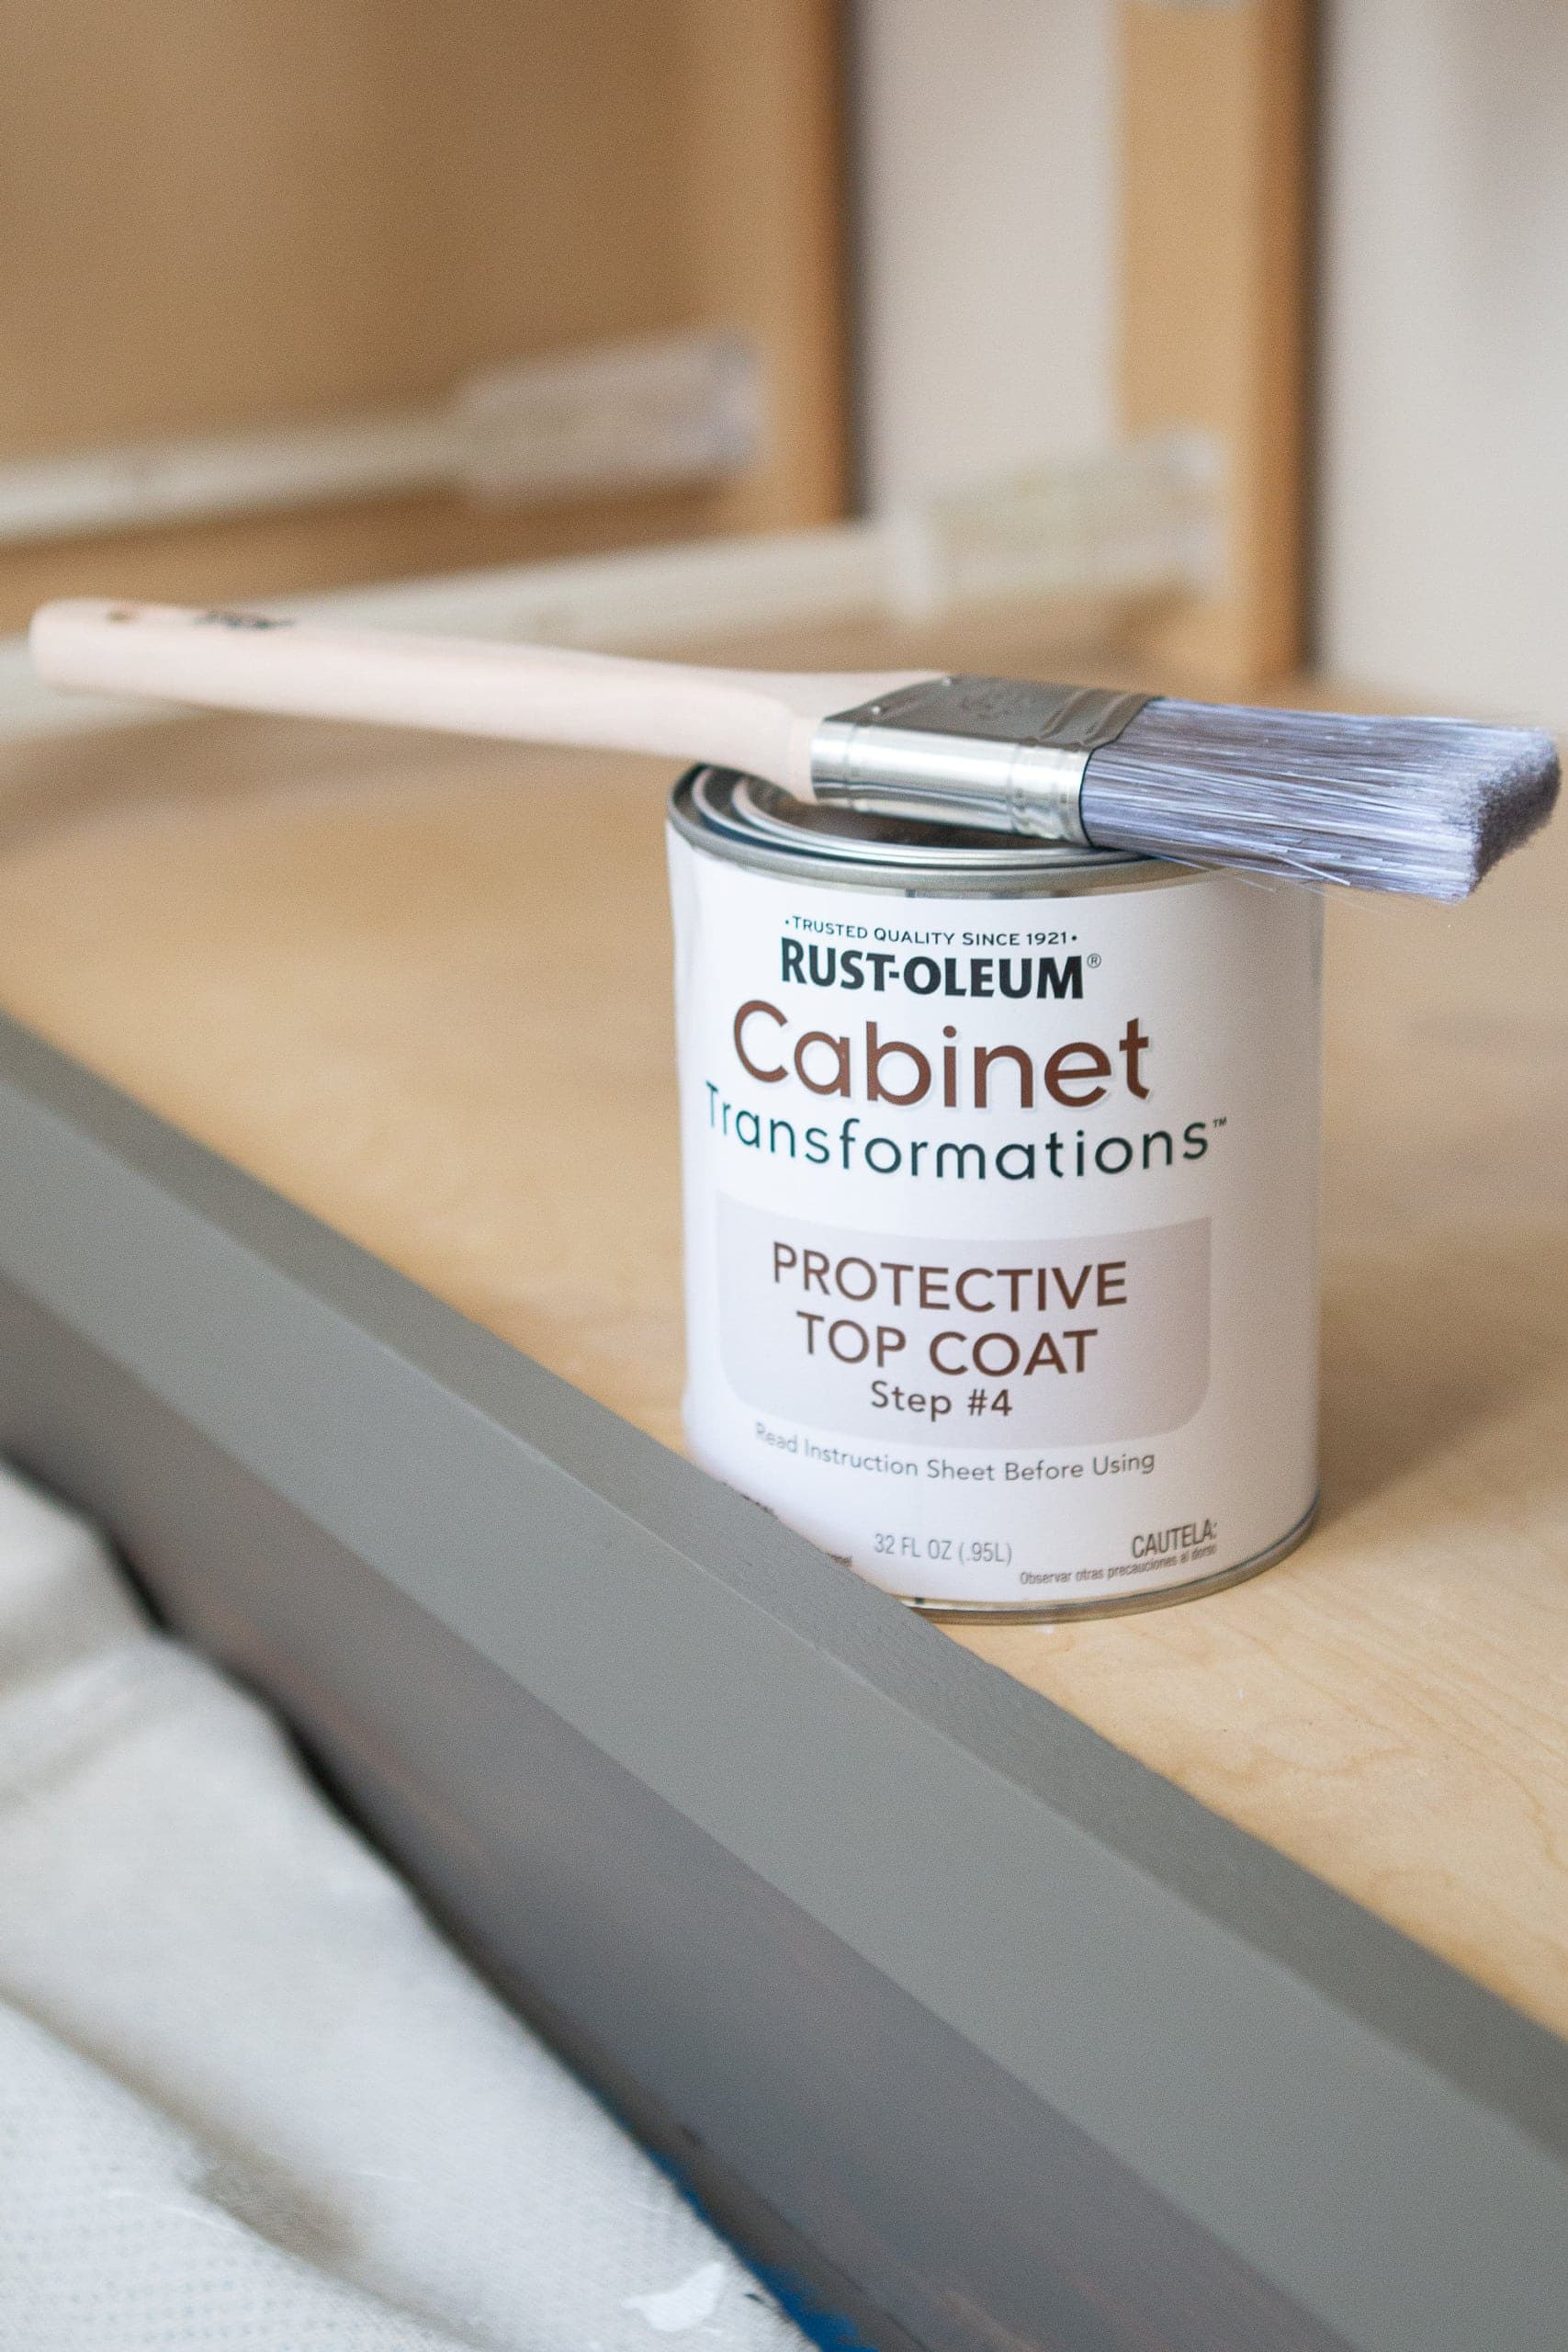 The top coat helps protect the finish